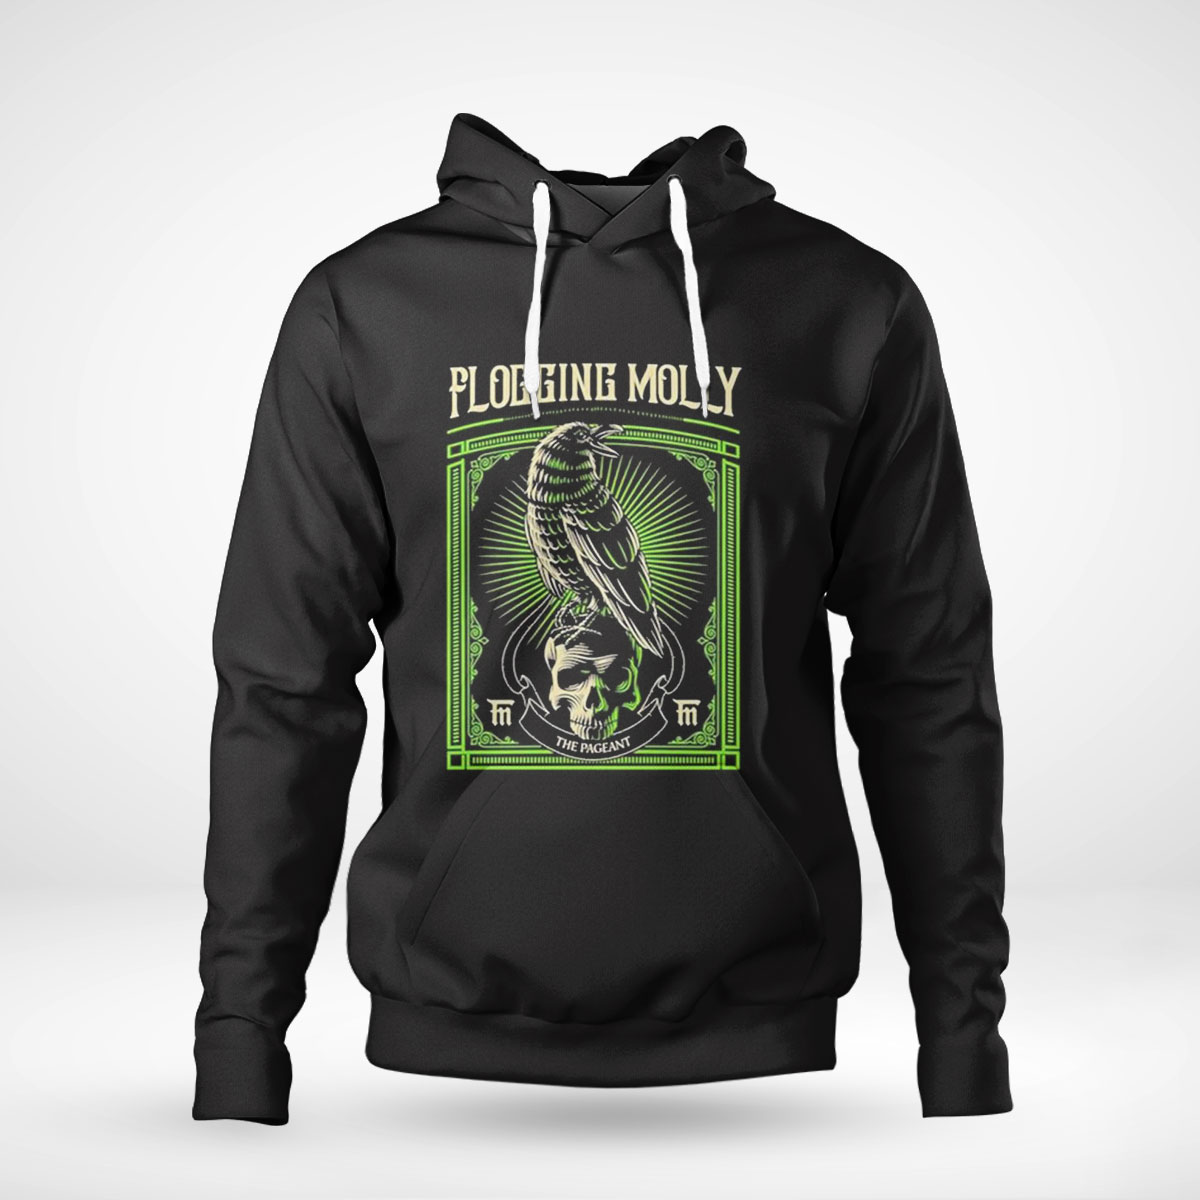 Black Crow And Skull Green Background Flogging Molly Shirt Longsleeve